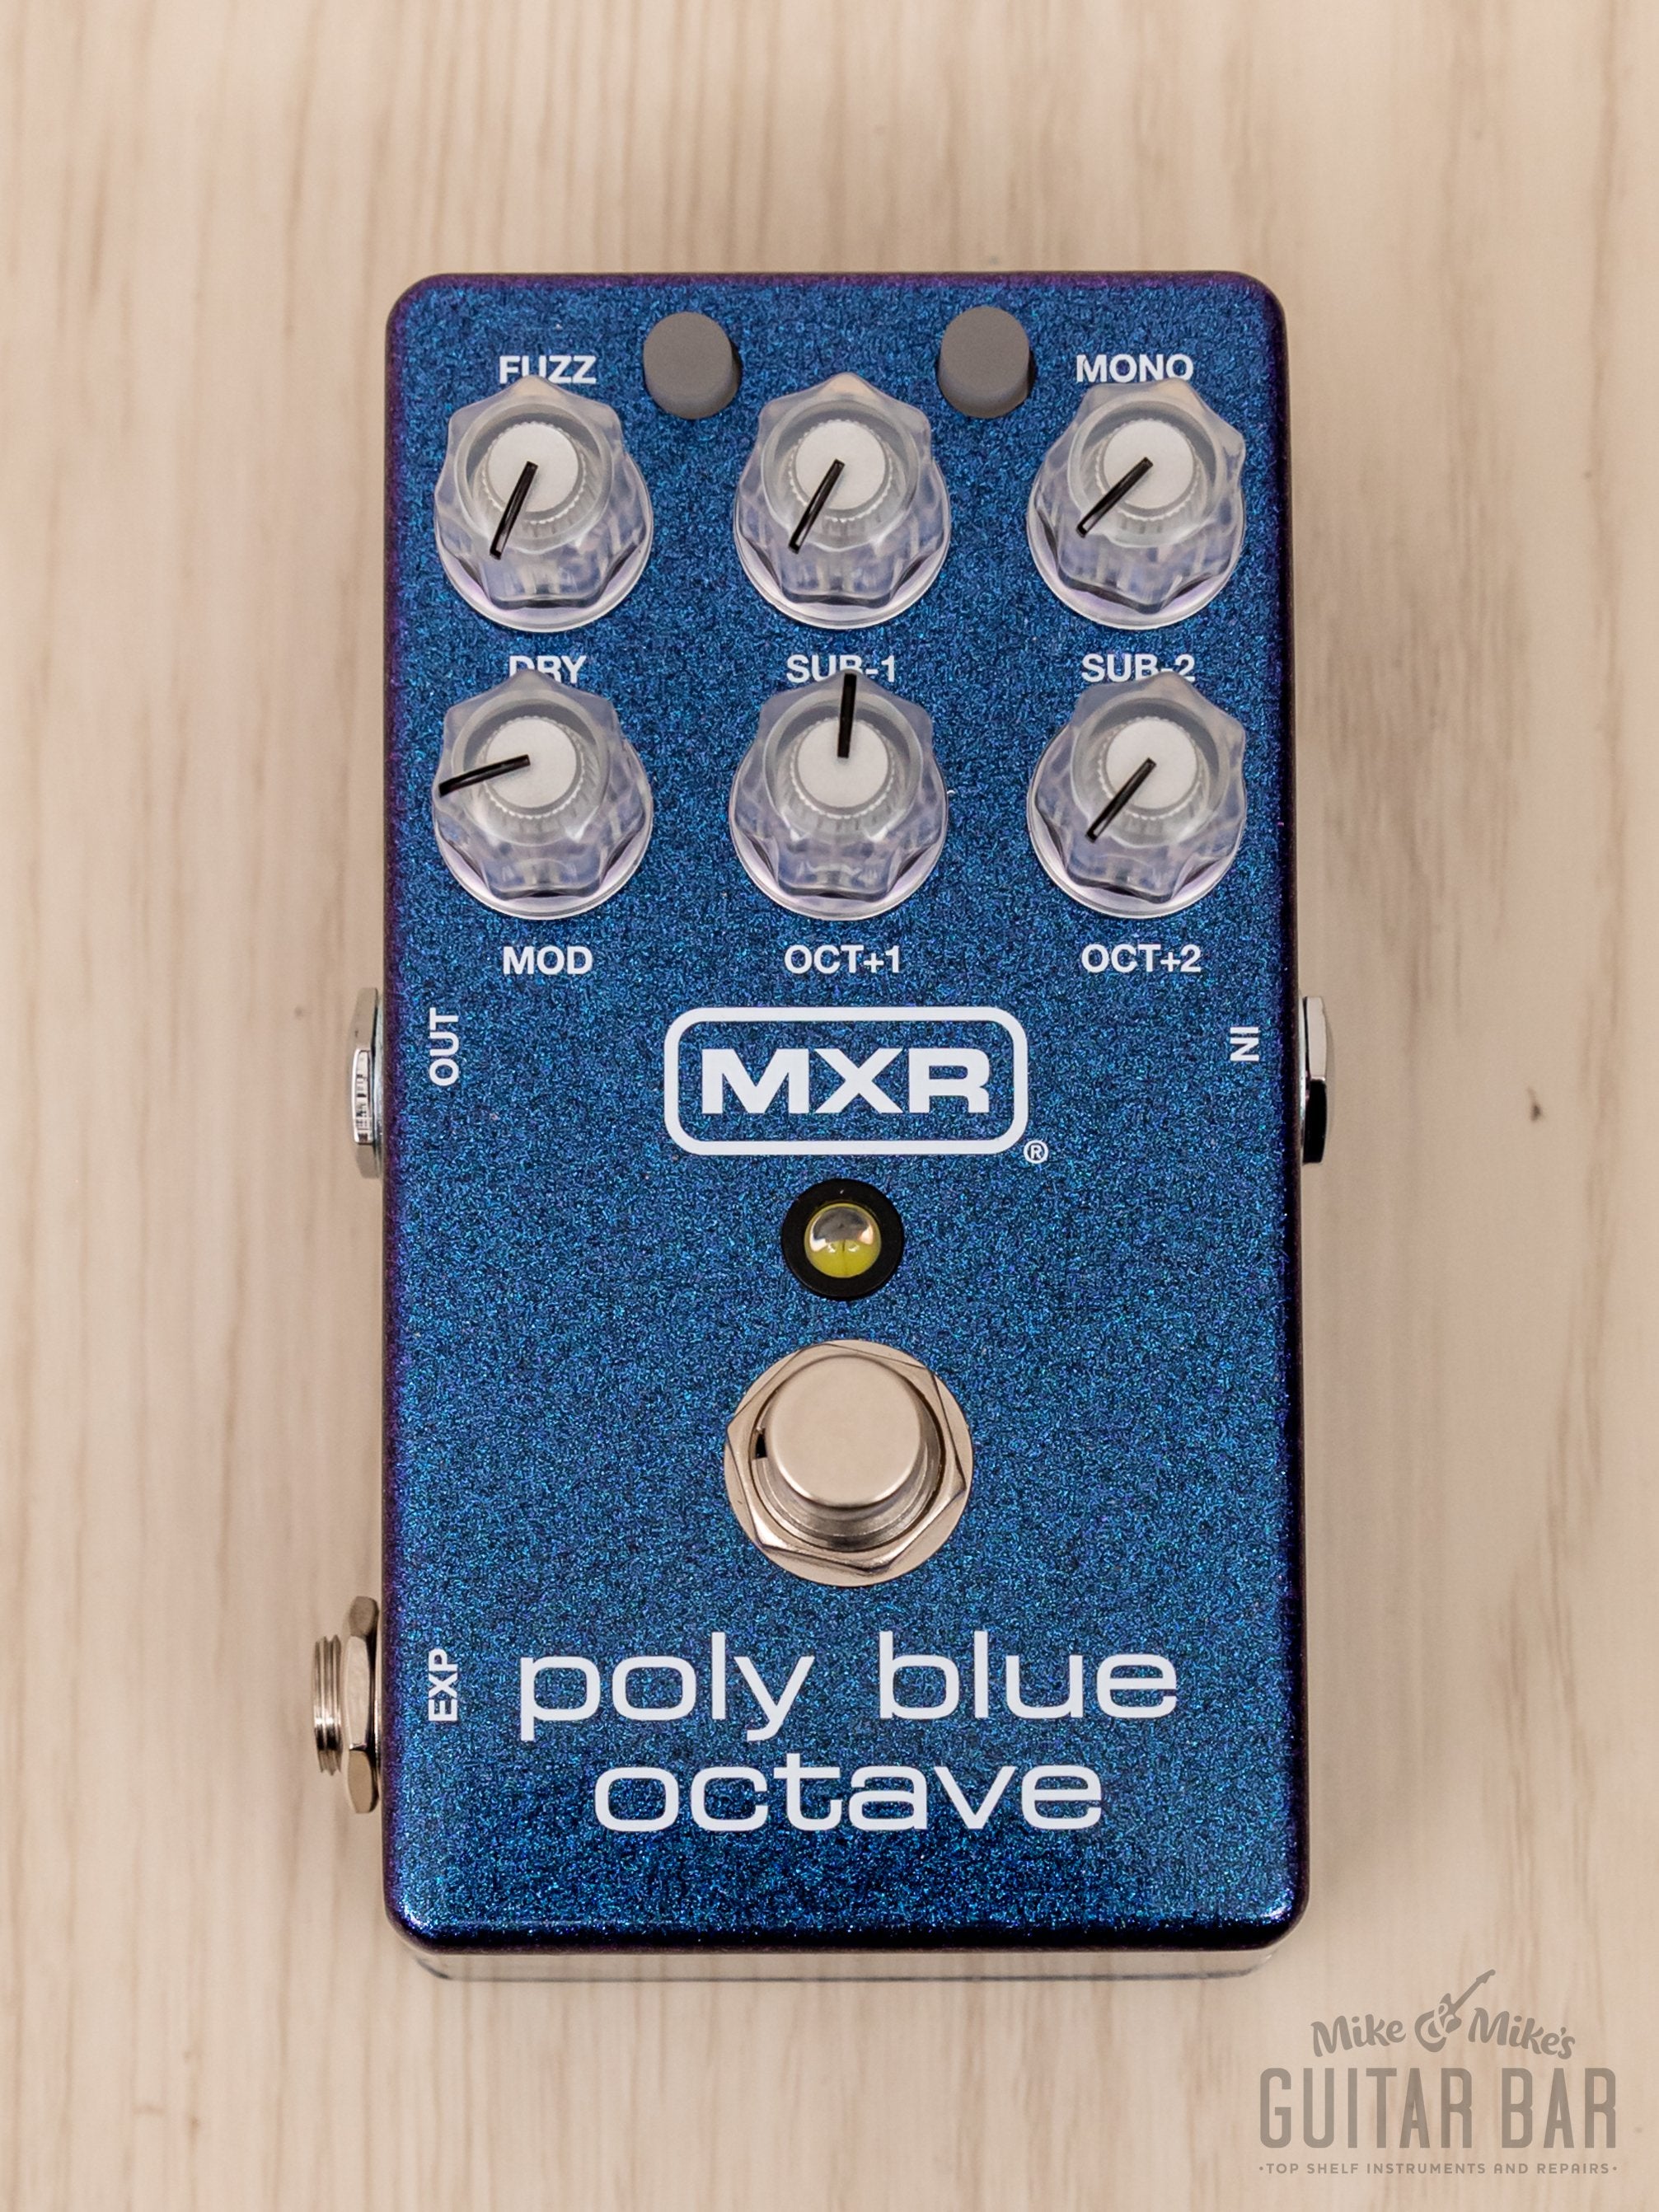 MXR Poly Blue Octave Guitar M306 Effects Pedal w/ Box, Power Supply